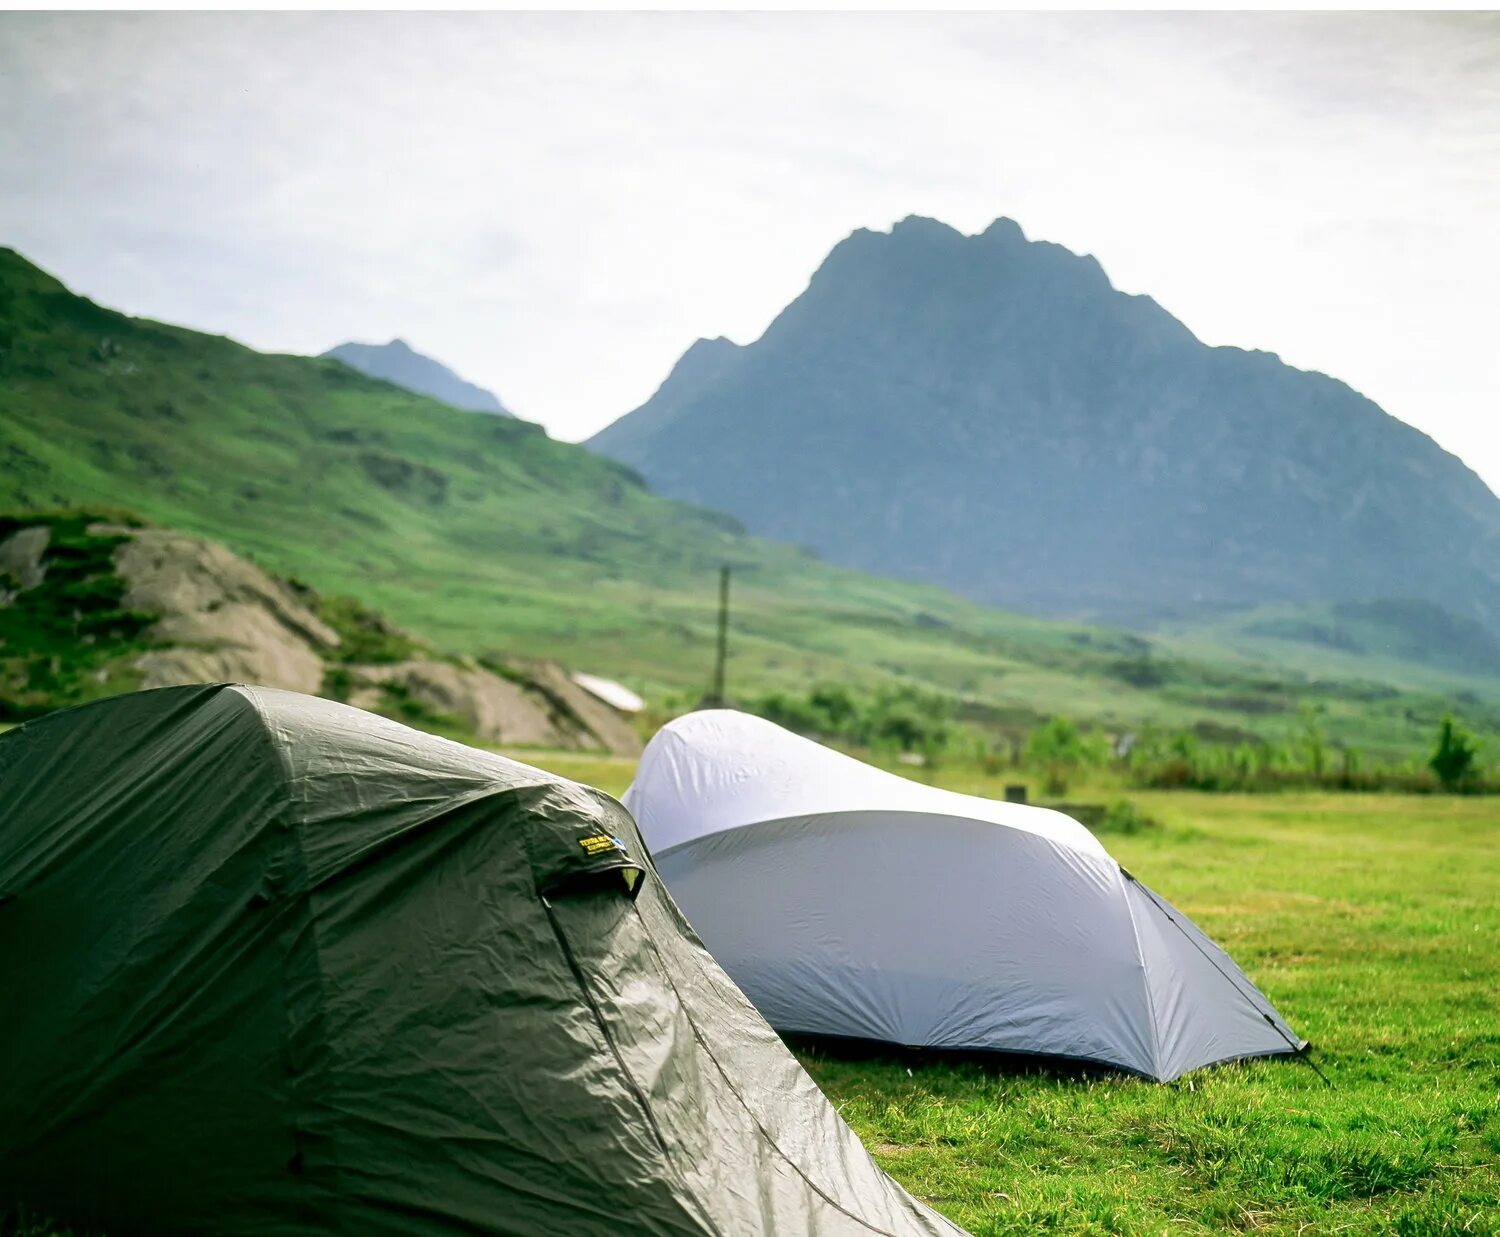 Tent картинка. Палатка kailas Holiday 4 Camping Tent Inca Yellow. Дизайн тента. Camping Hill range. Only camping